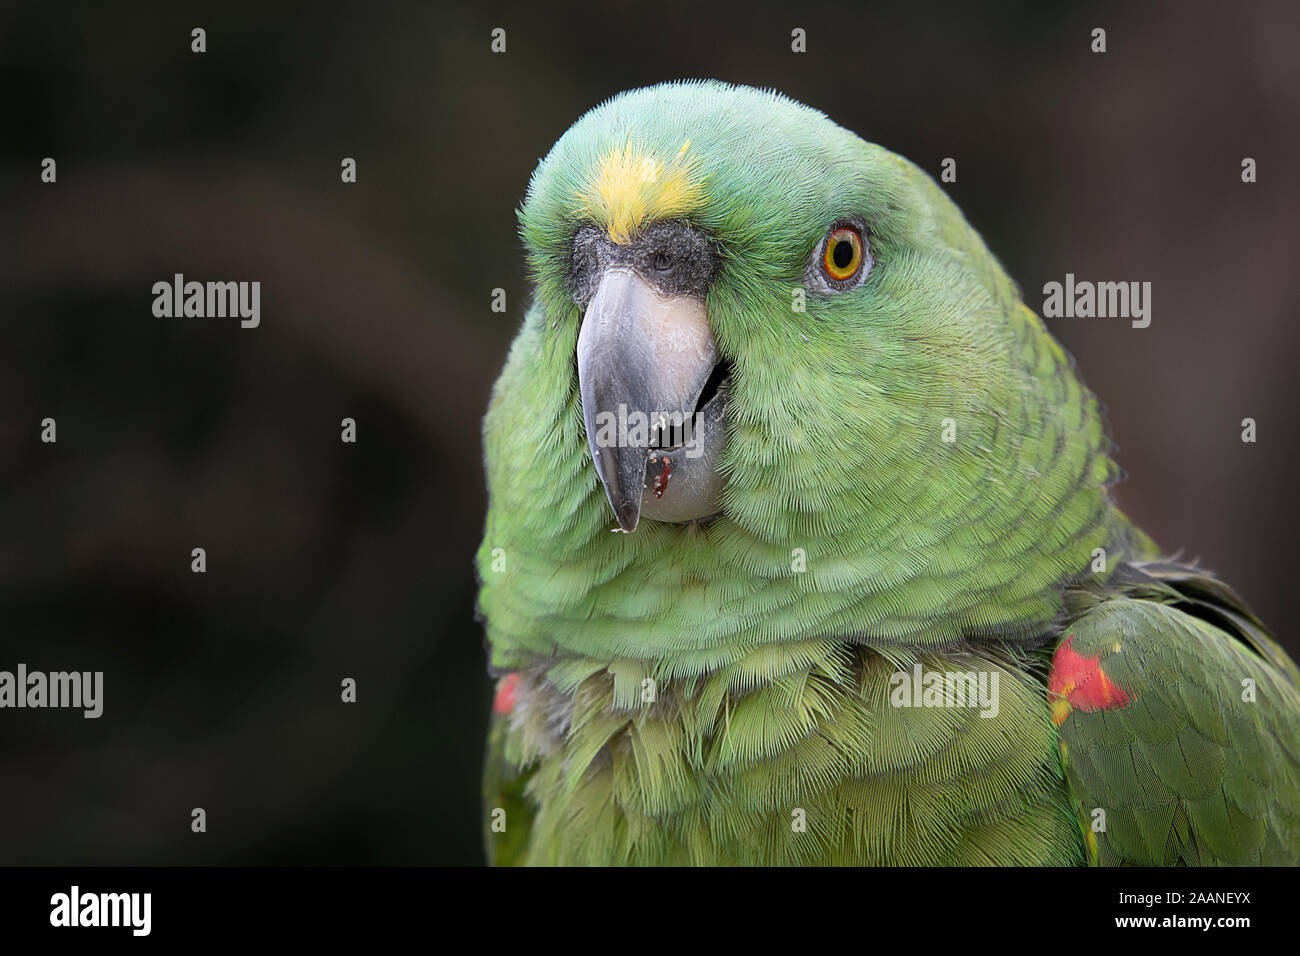 A close up head portrait of a Yellow-crowned amazon or yellow-crowned parrot, Amazona ochrocephala, a species of parrot native to tropical South Ameri Stock Photo